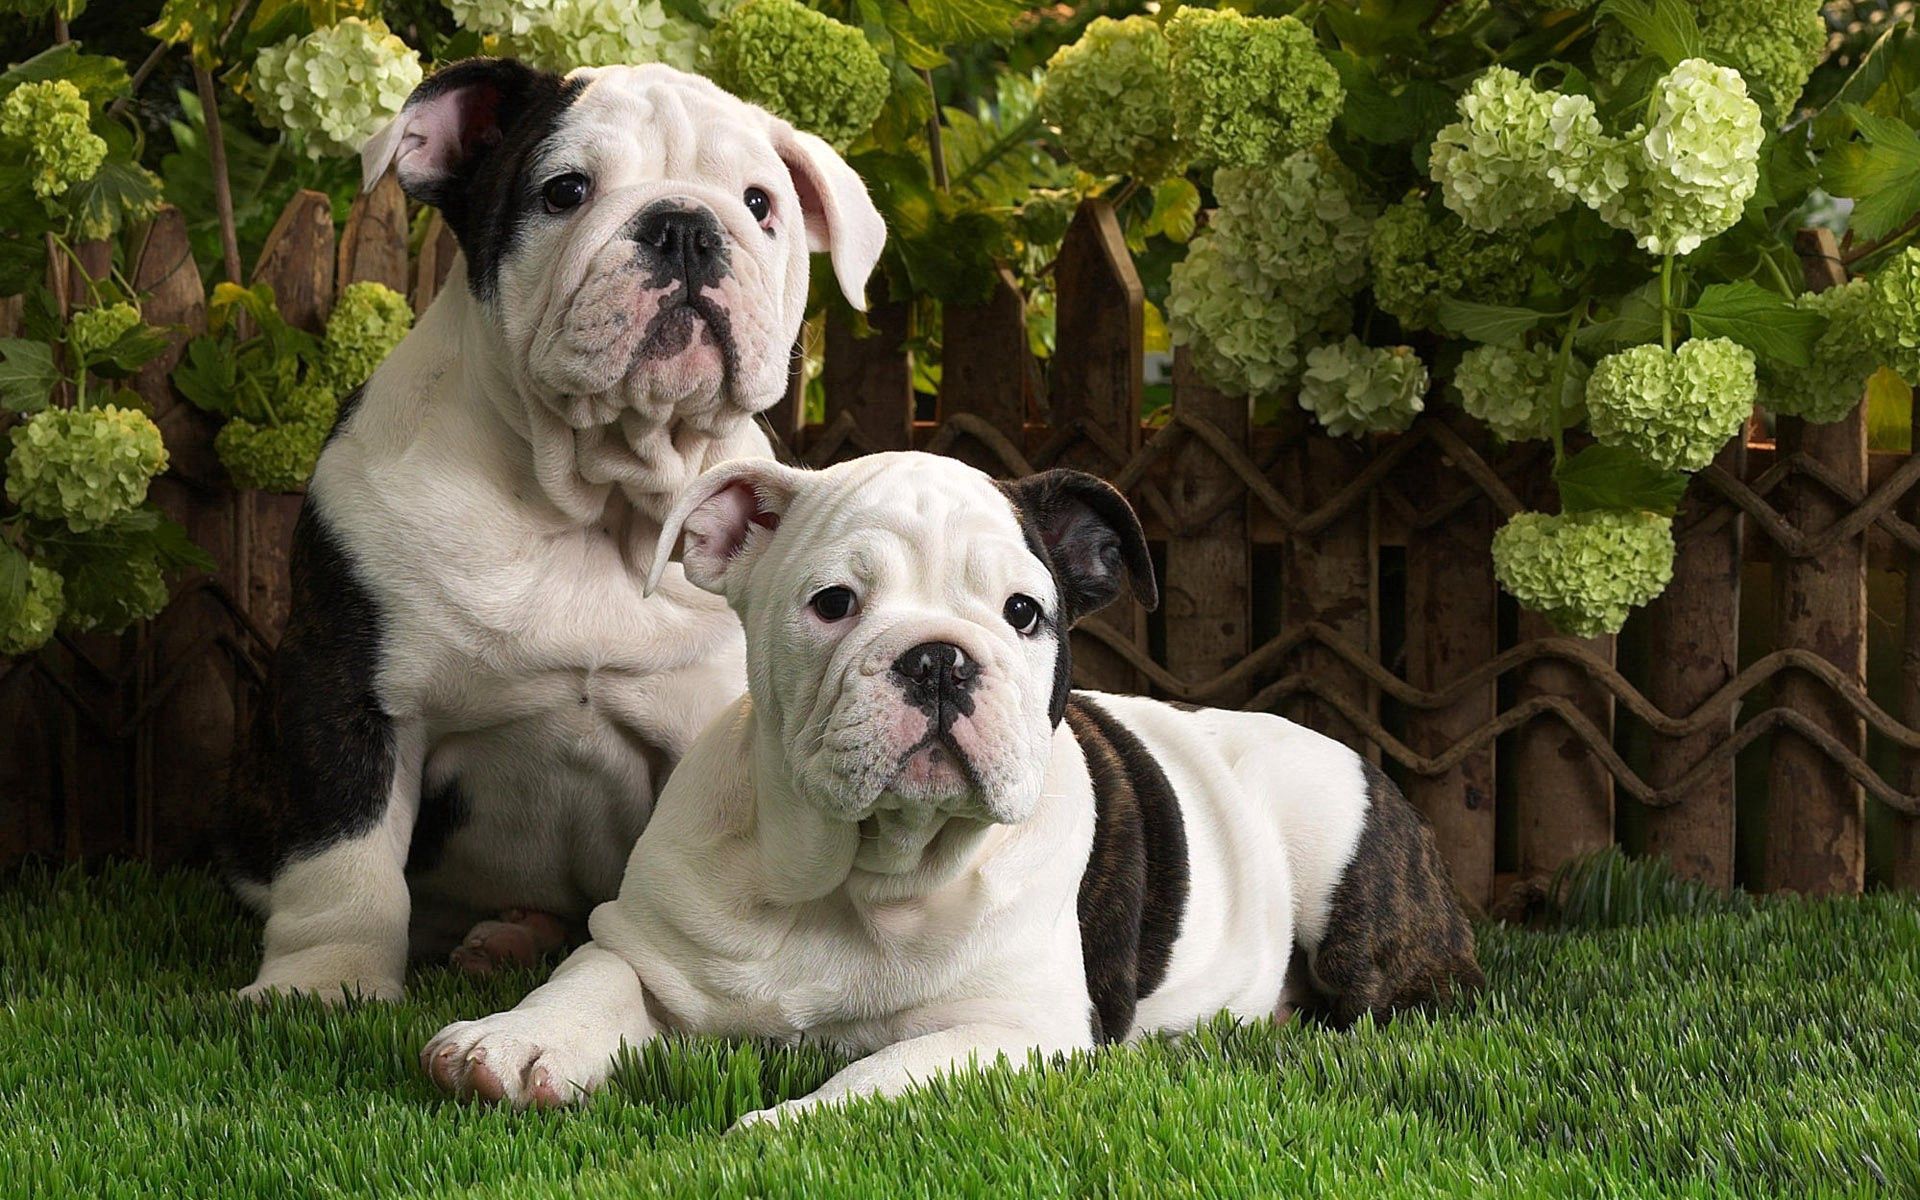 Lock Screen PC Wallpaper animals, dogs, grass, black, white, couple, pair, to lie down, lie, spotted, spotty, bulldog